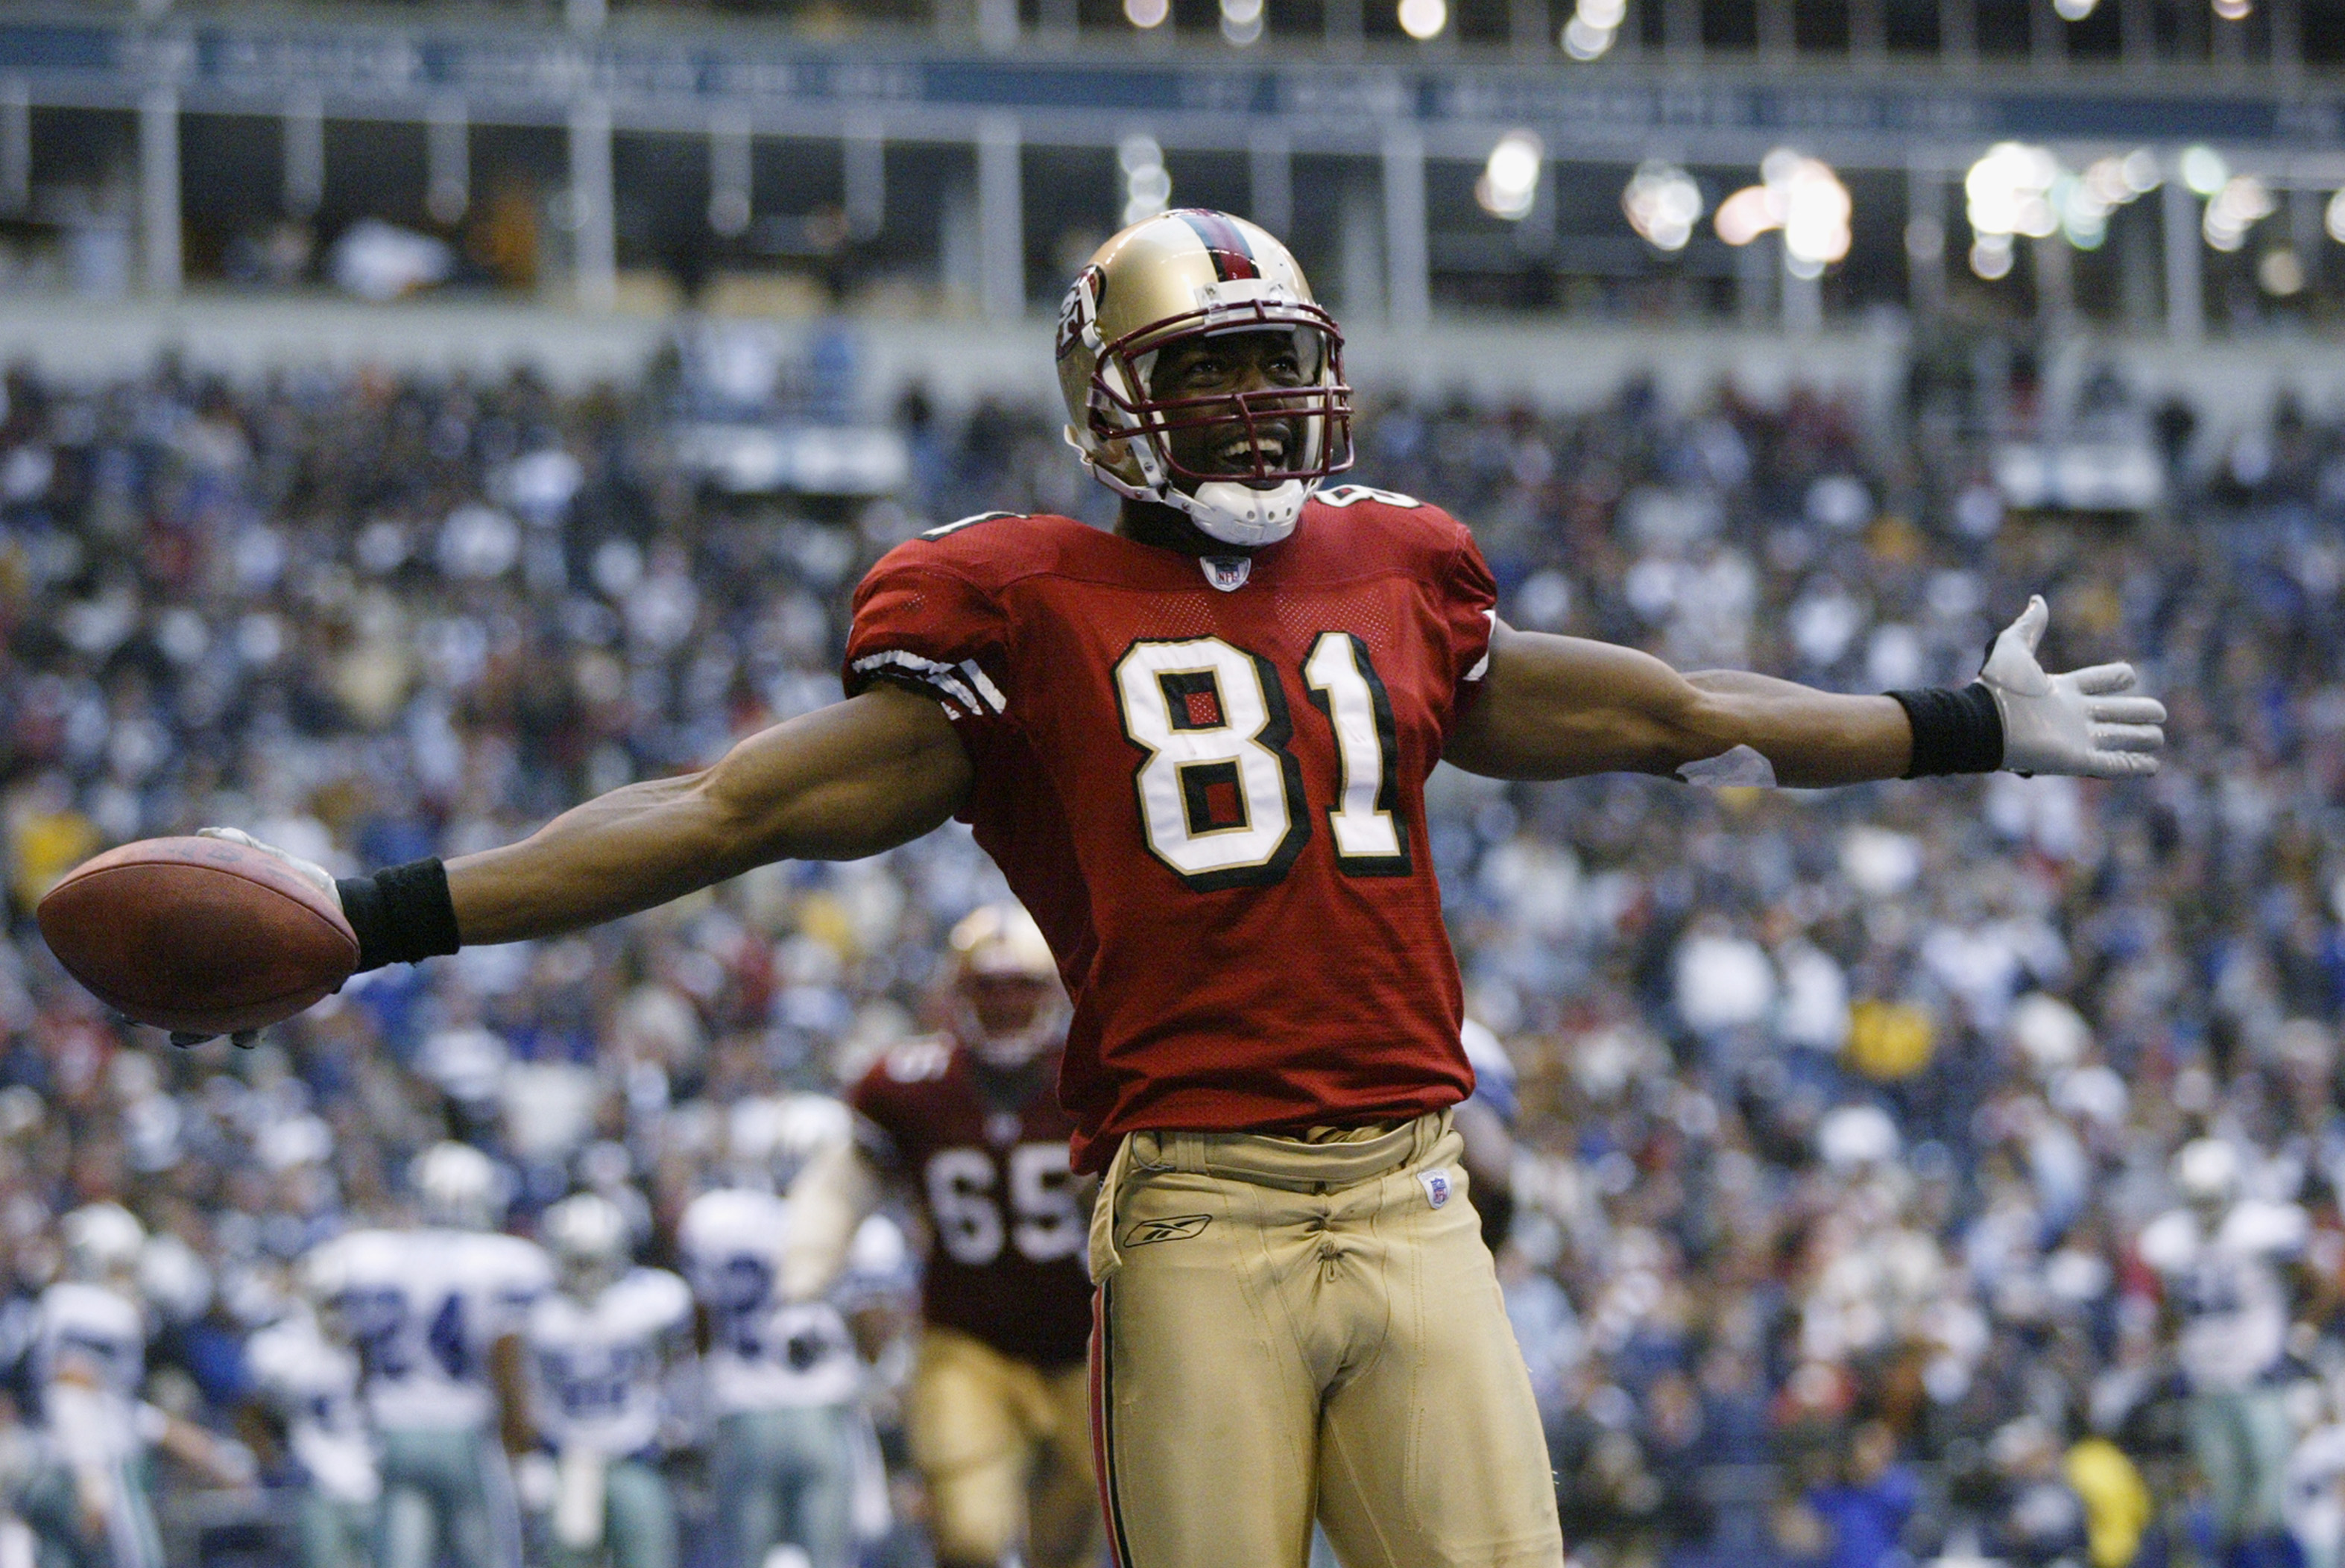 IRVING, TX - DECEMBER 8: Wide receiver Terrell Owens #81 of the San Francisco 49ers celebrates in the end zone after scoring a touchdown against the Dallas Cowboys with 12 seconds left on December 8, 2002 at Texas Stadium in Irving, Texas. The 49ers beat the Cowboys 31-27. (Photo by Brian Bahr/Getty Images)